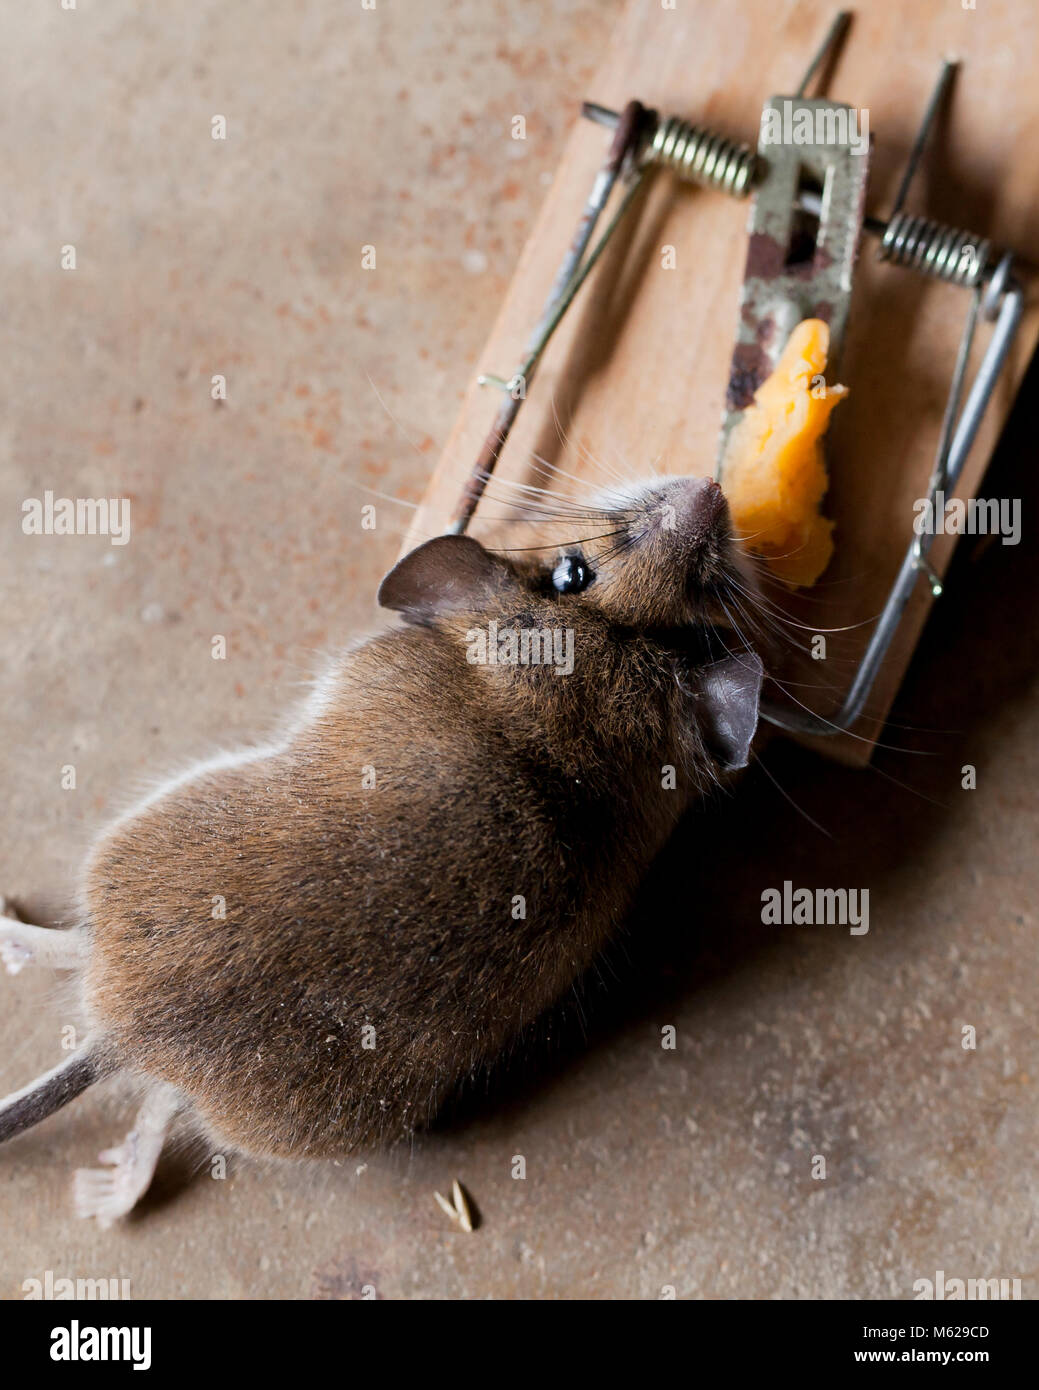 Dead common house mouse (Mus musculus) caught in mousetrap - USA Stock Photo